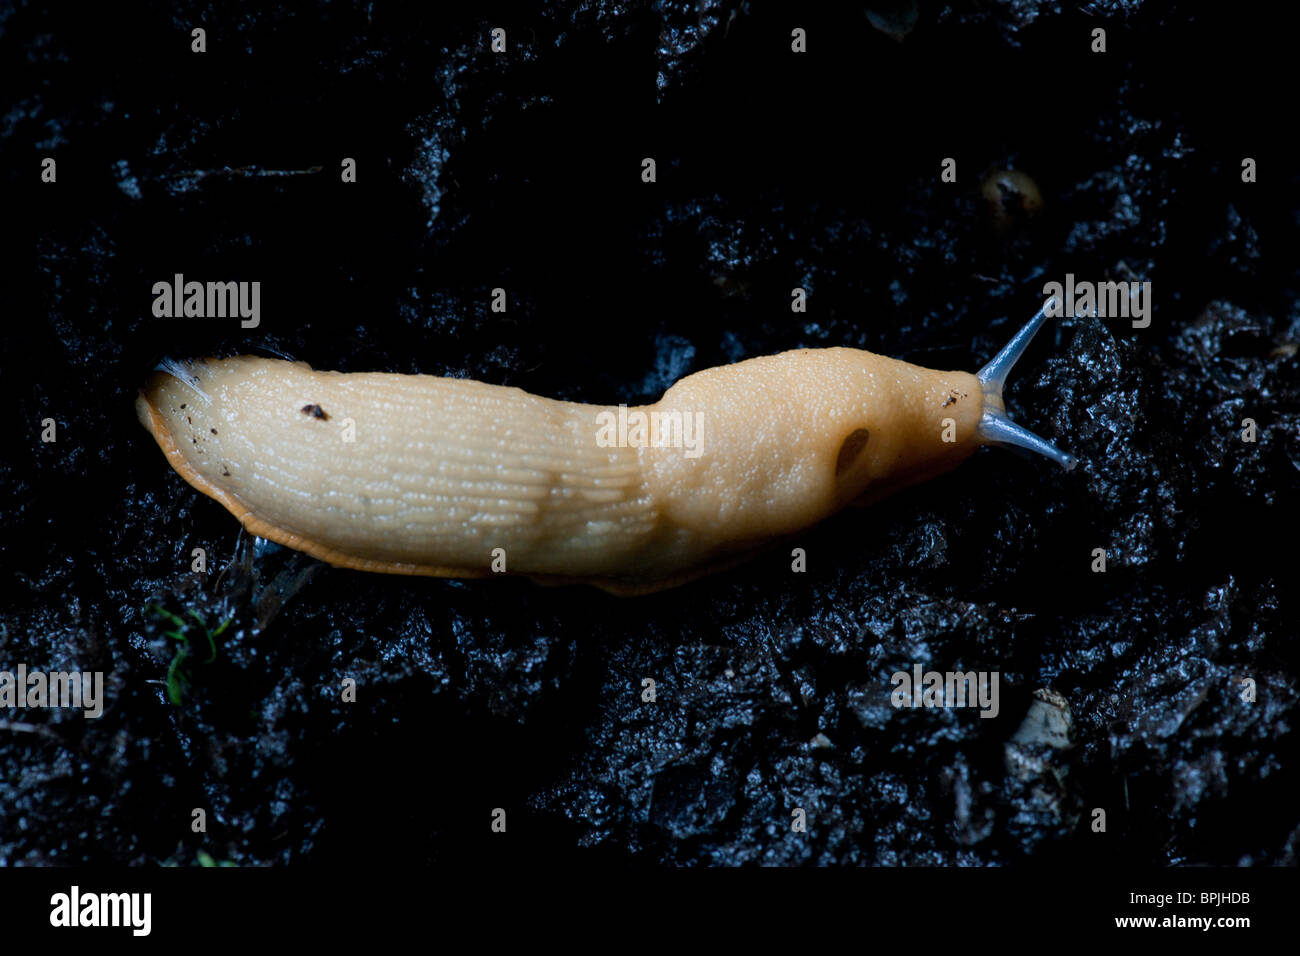 A white slug showing the breathing hole, called the pneumostome, and the optical and sensory tentacles Stock Photo